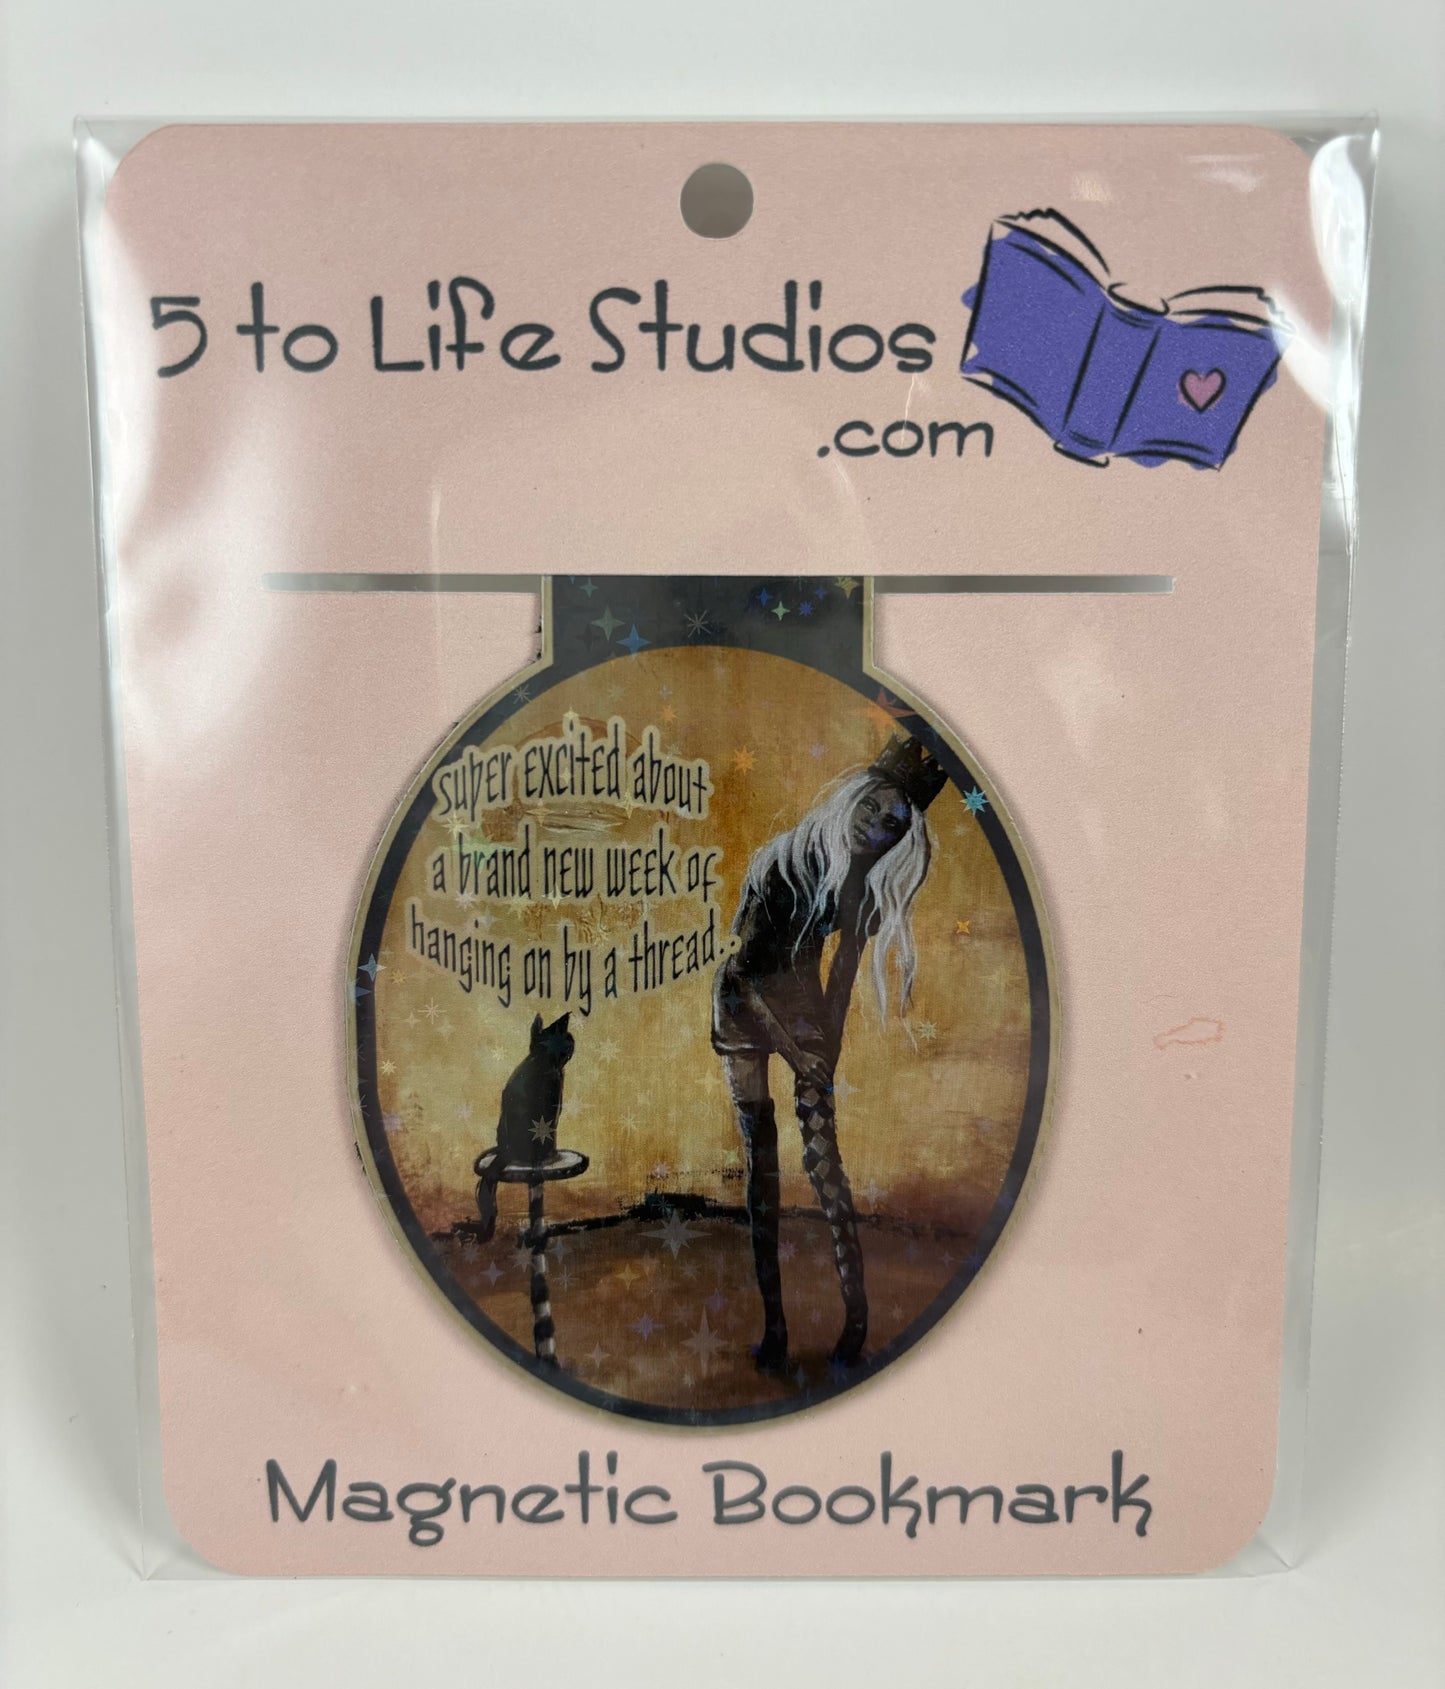 Slimclick Magnetic Bookmark "super excited about a brand new week of hanging on by a thread"